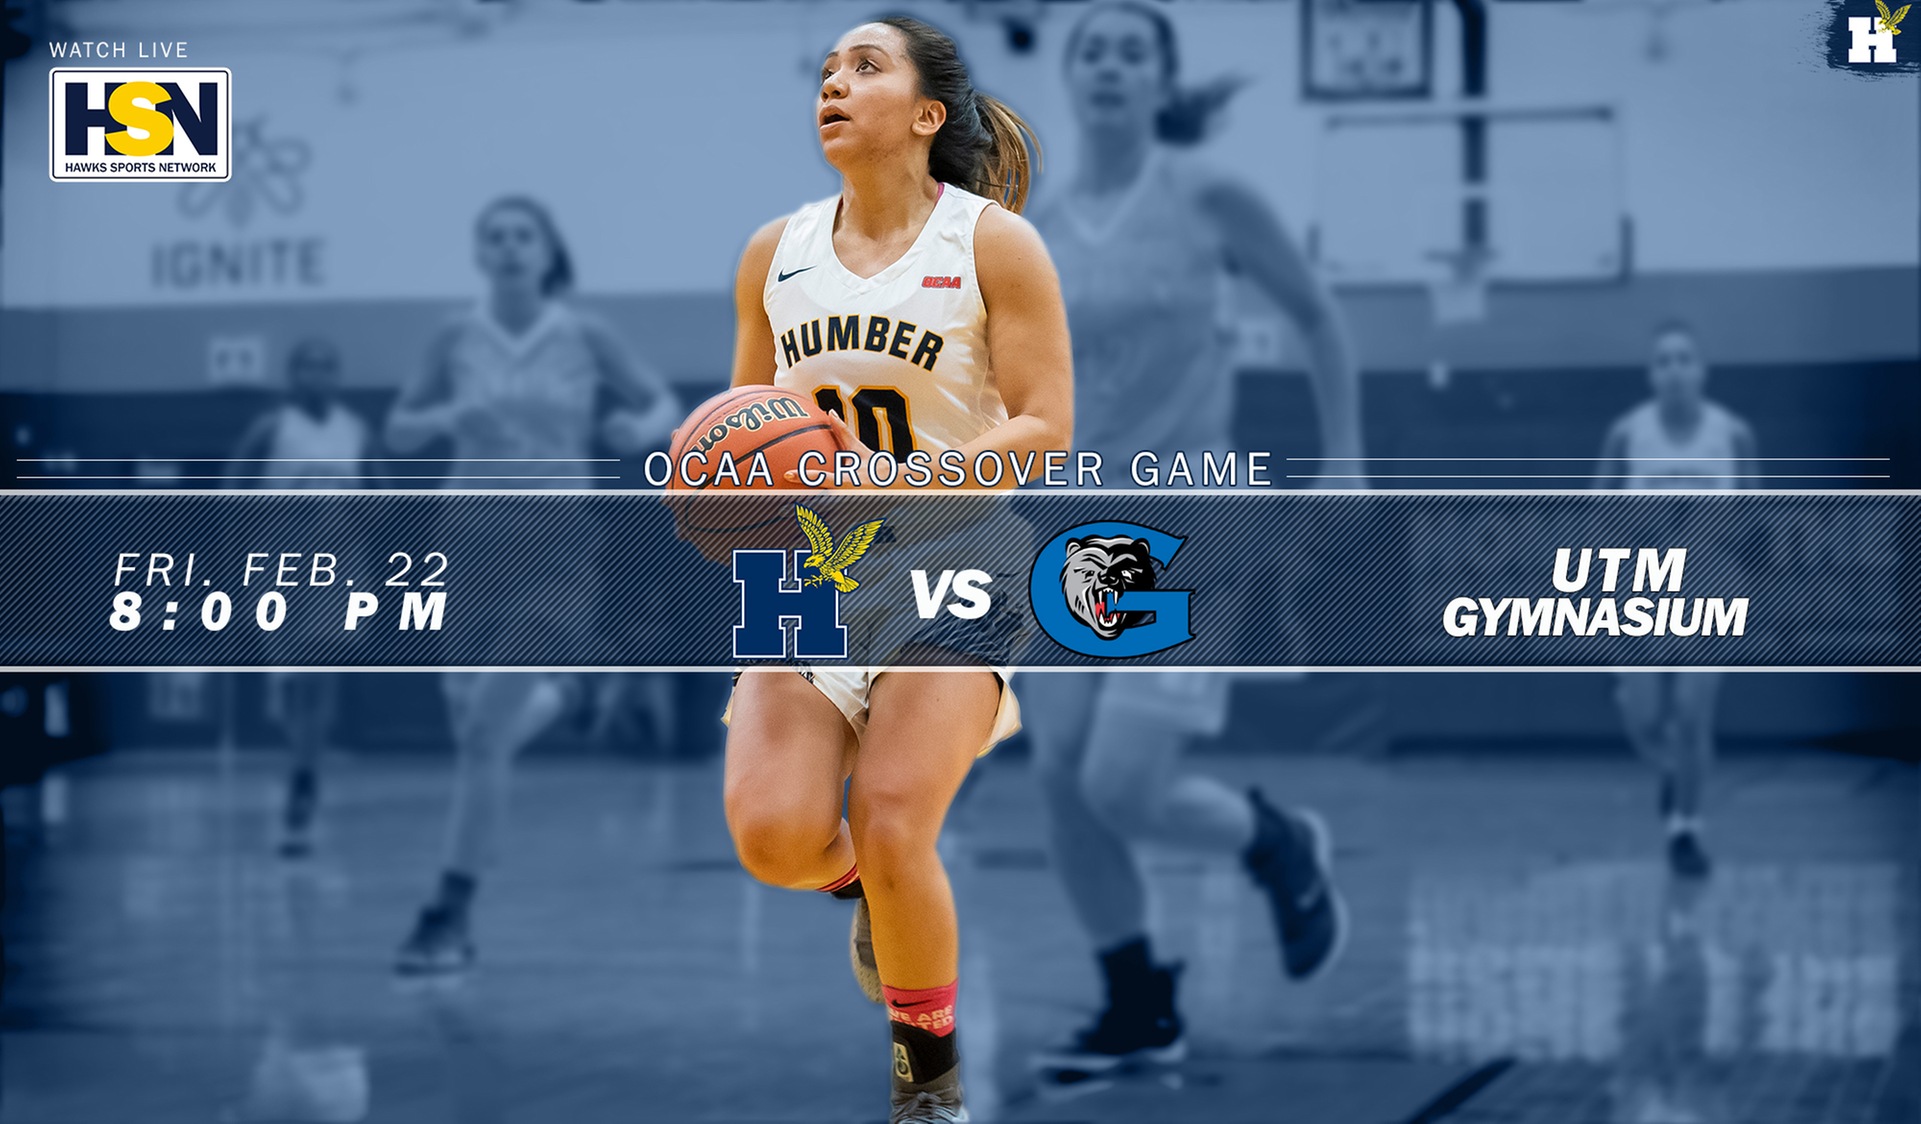 No. 10 HUMBER BEGINS TITLE DEFENCE FRIDAY AGAINST GEORGIAN